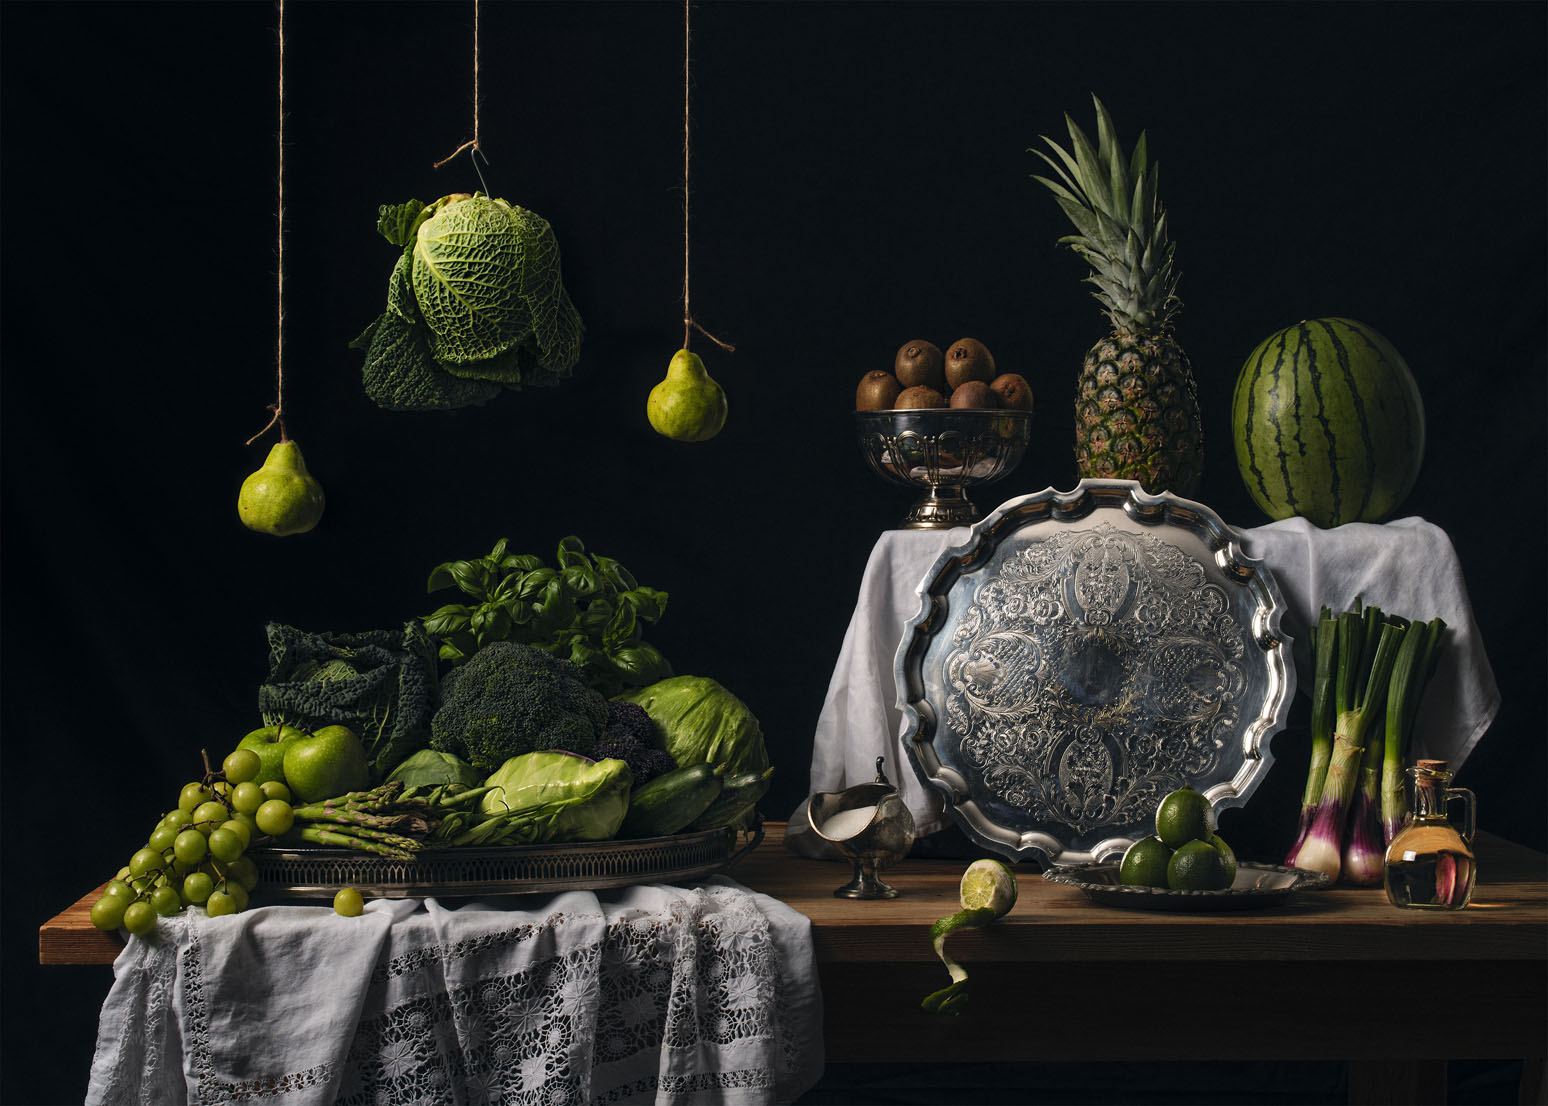 Still life photography by Pete Harper